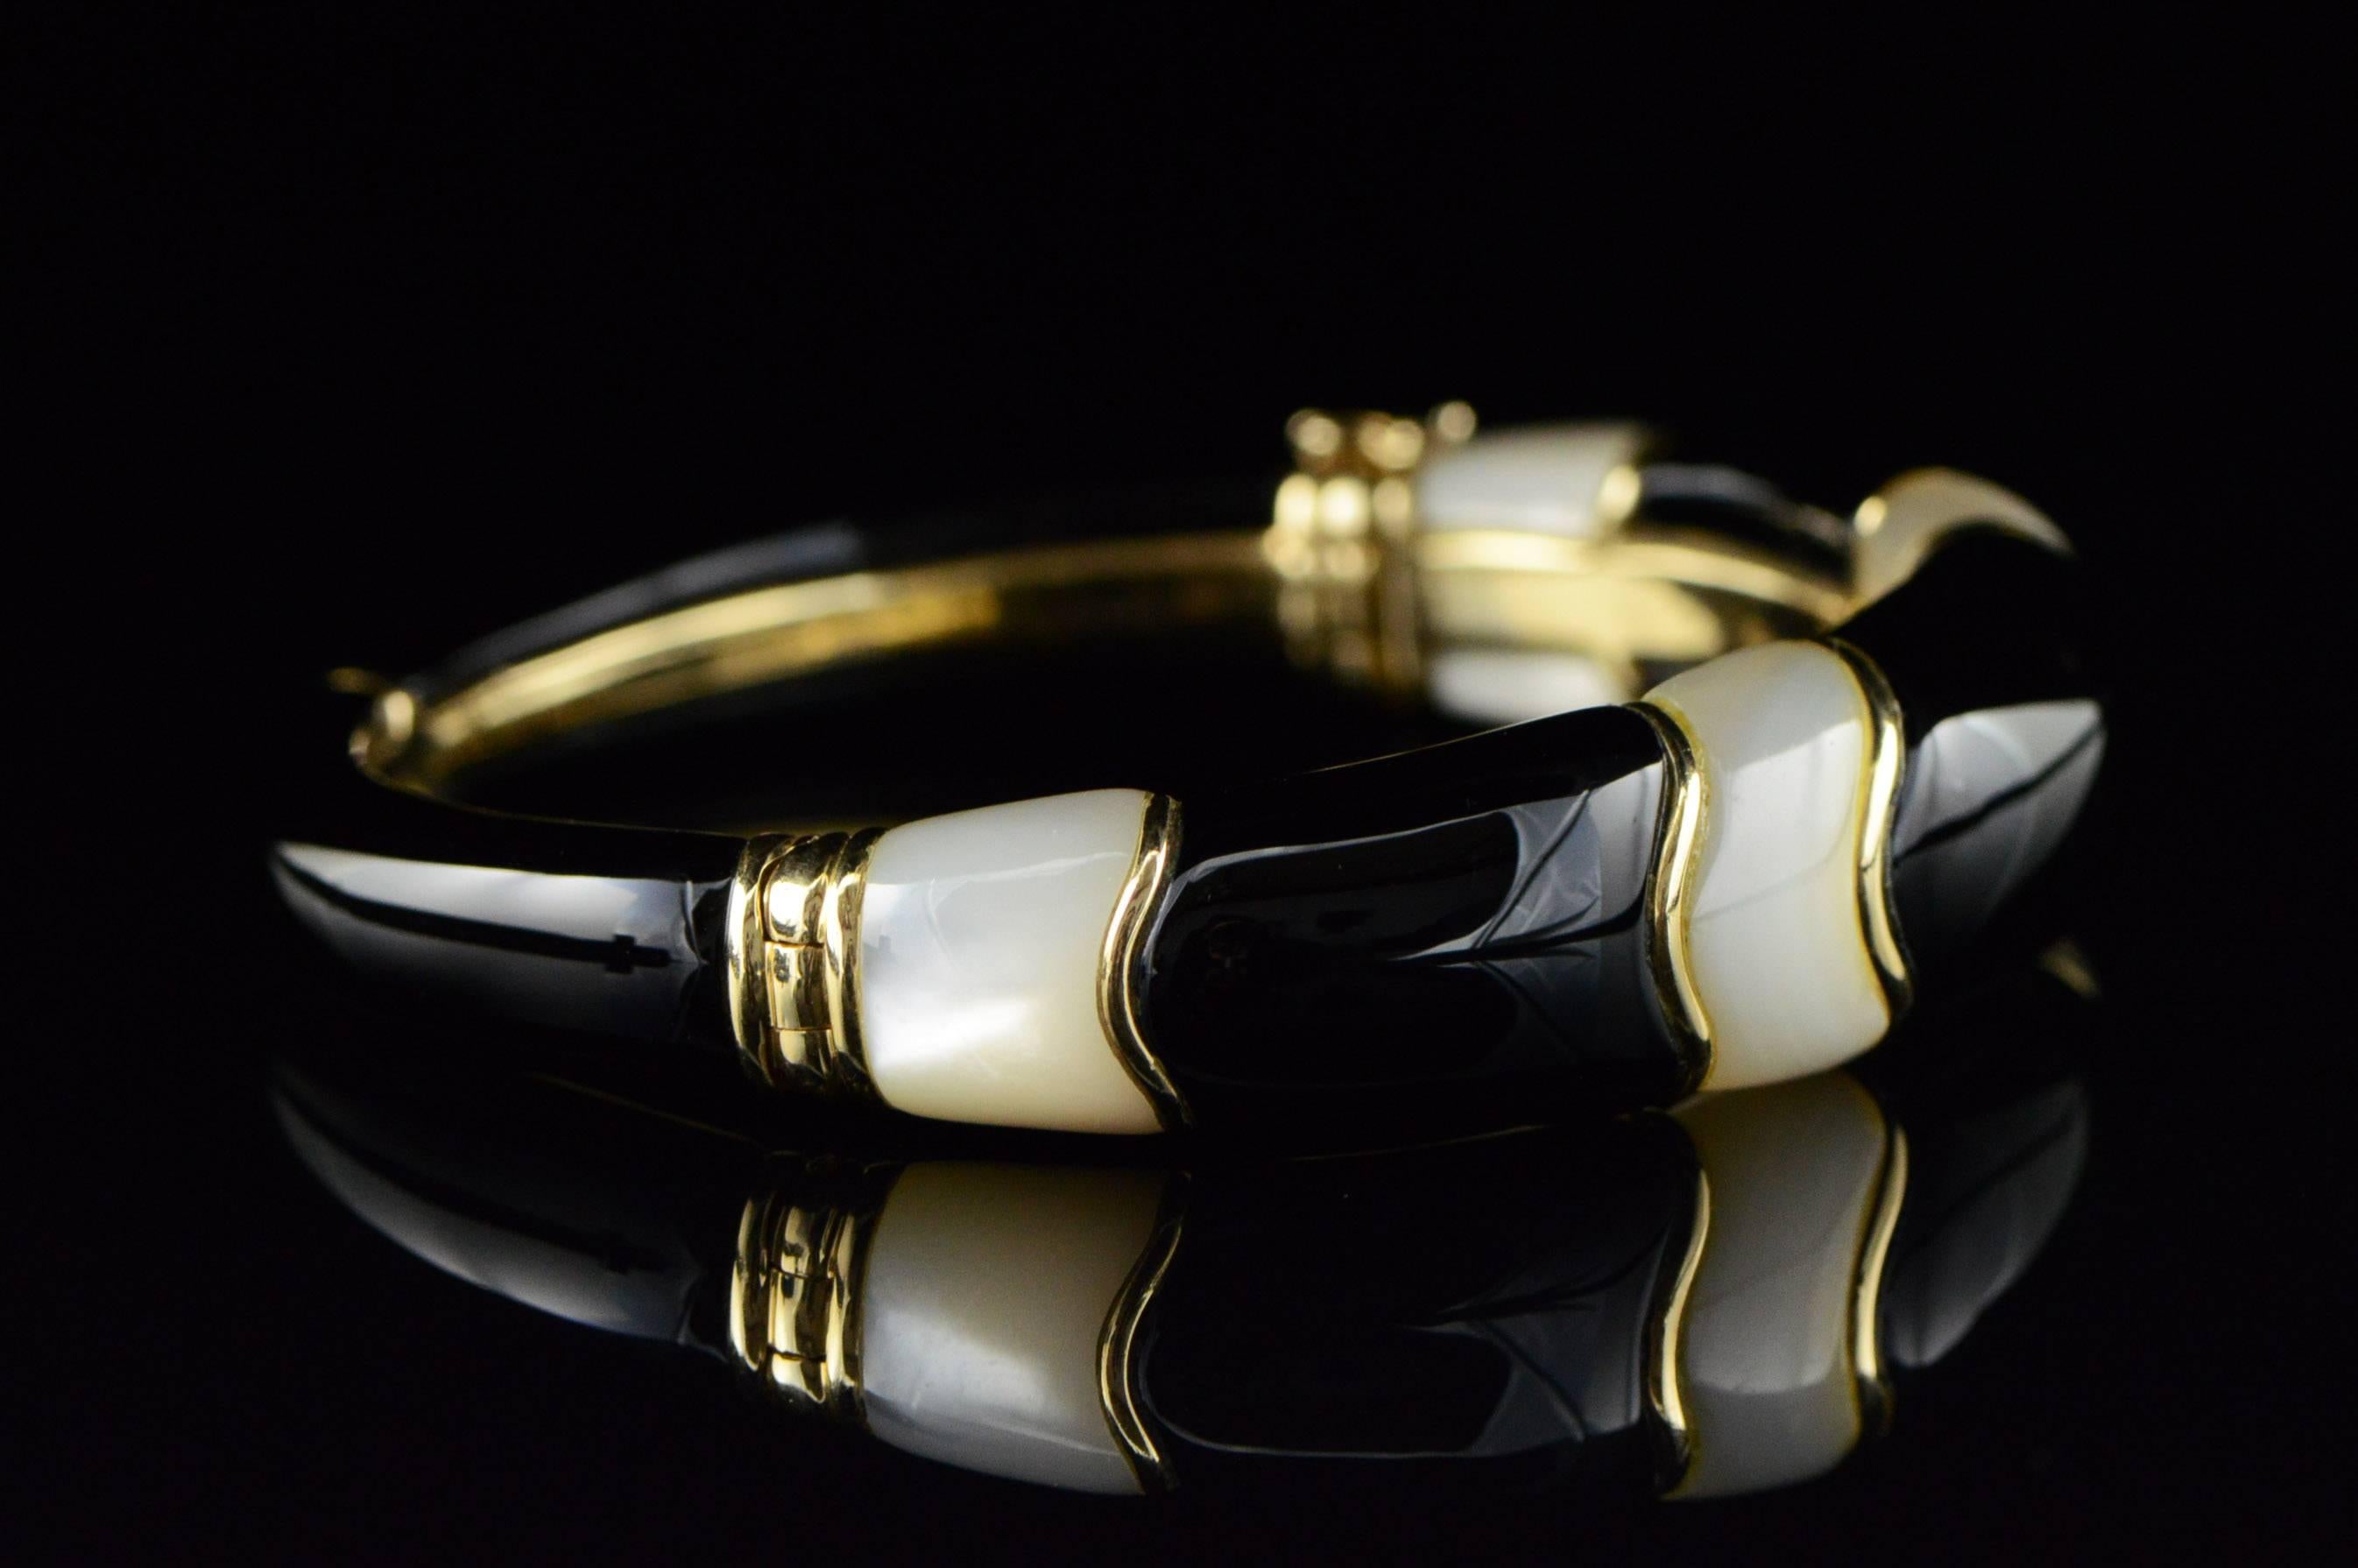 ·Item: 14K Heavy - Black Onyx Mother of Pearl Bangle Bracelet 2.25" Yellow Gold

·Era: Modern / 1990s

·Composition: 14k Gold Marked / Tested

·Weight: 52.7g